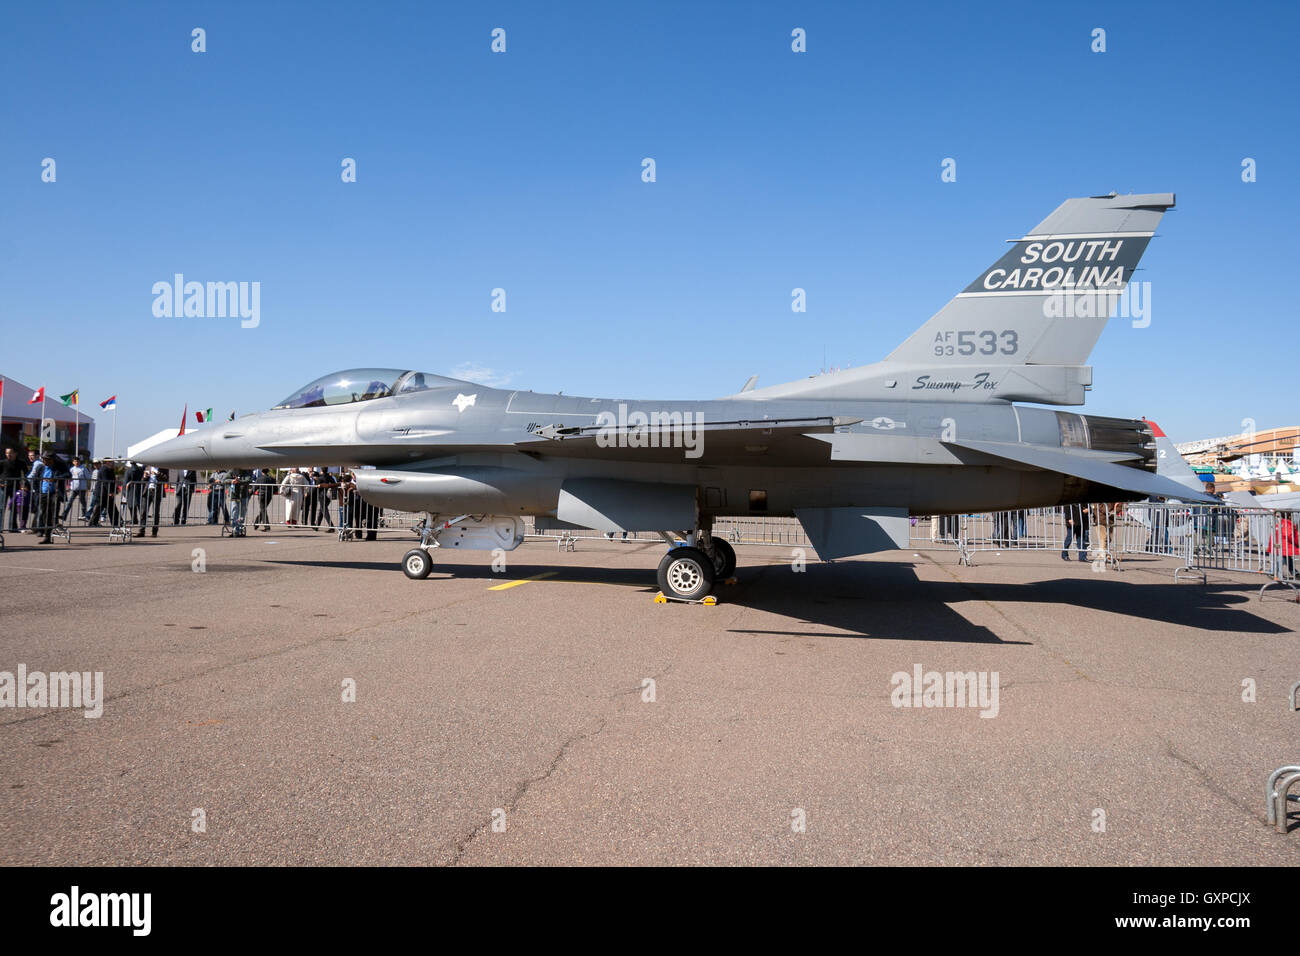 South Carolina Air National Guard F-16 fighter jet on display at the Marrakech Air Expo 2010 Stock Photo